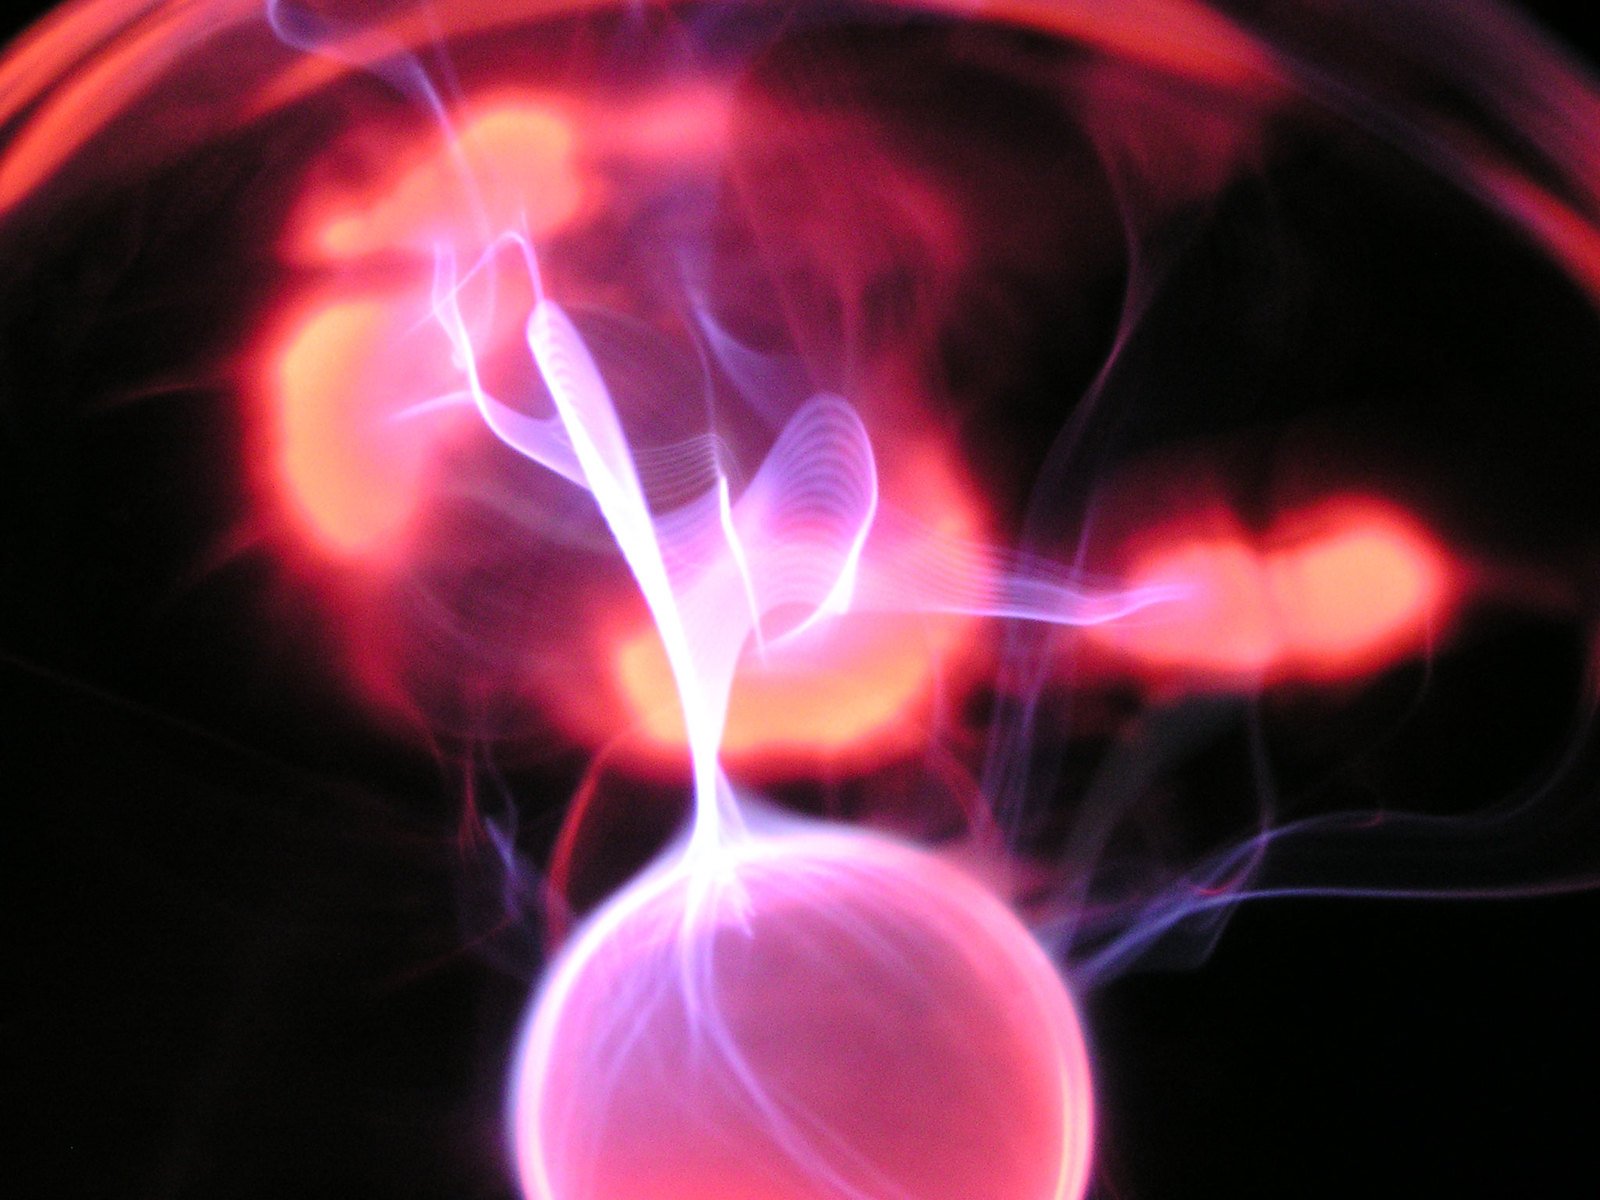 the red blur is shining around a round object